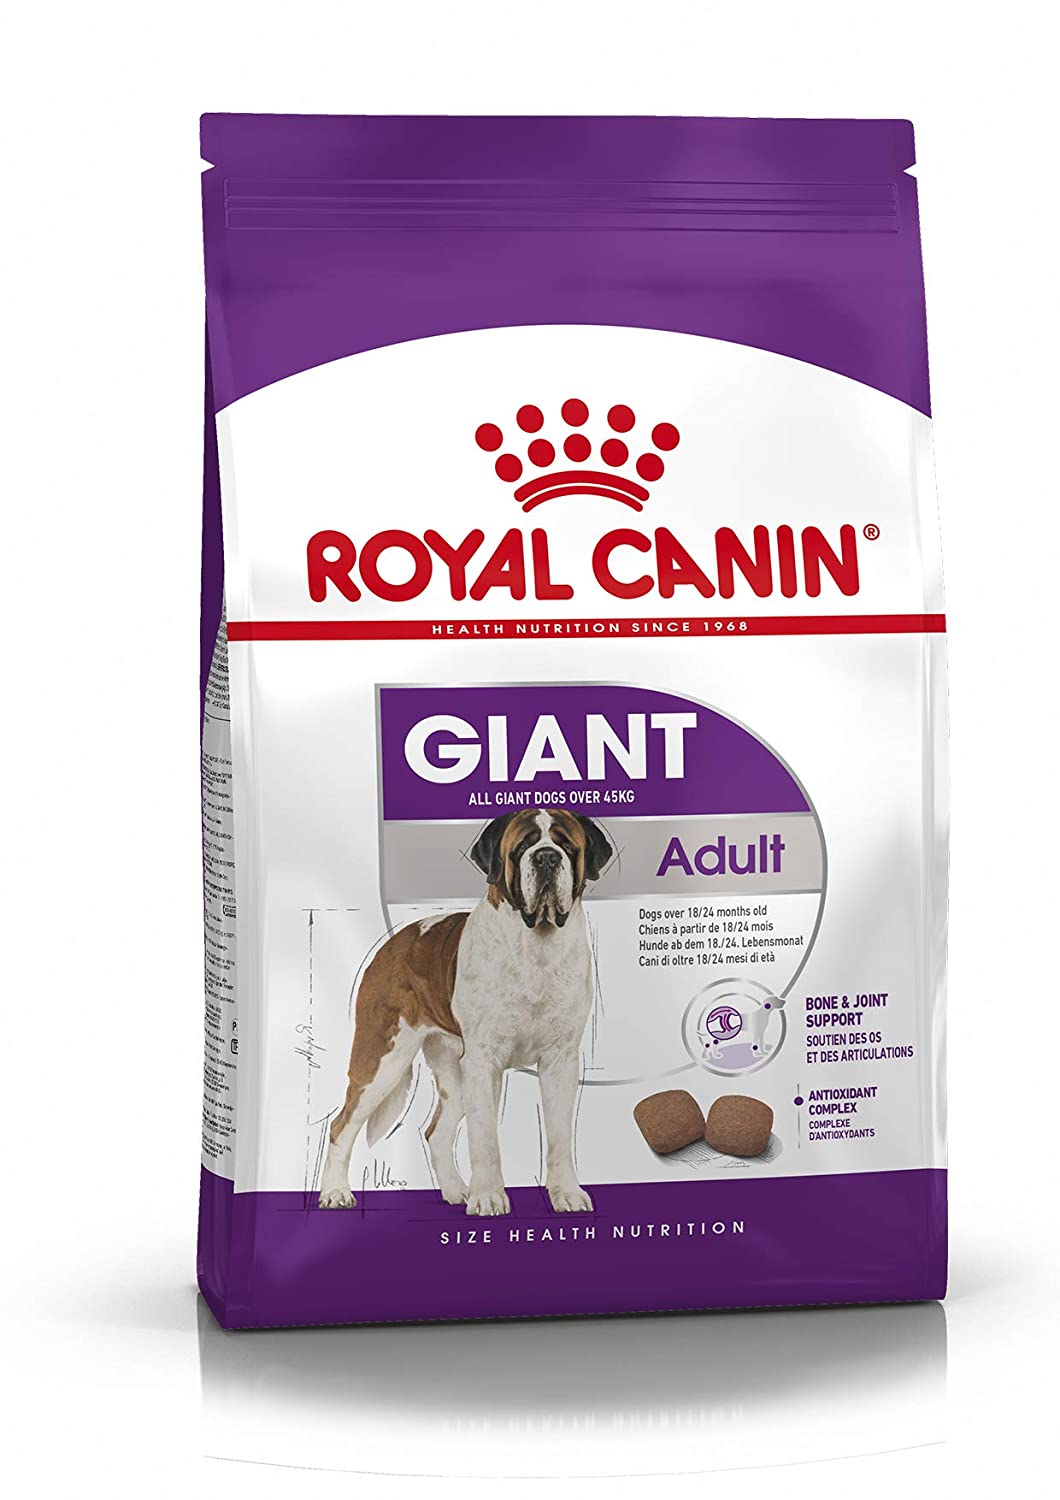 ROYAL CANIN – GIANT ADULT